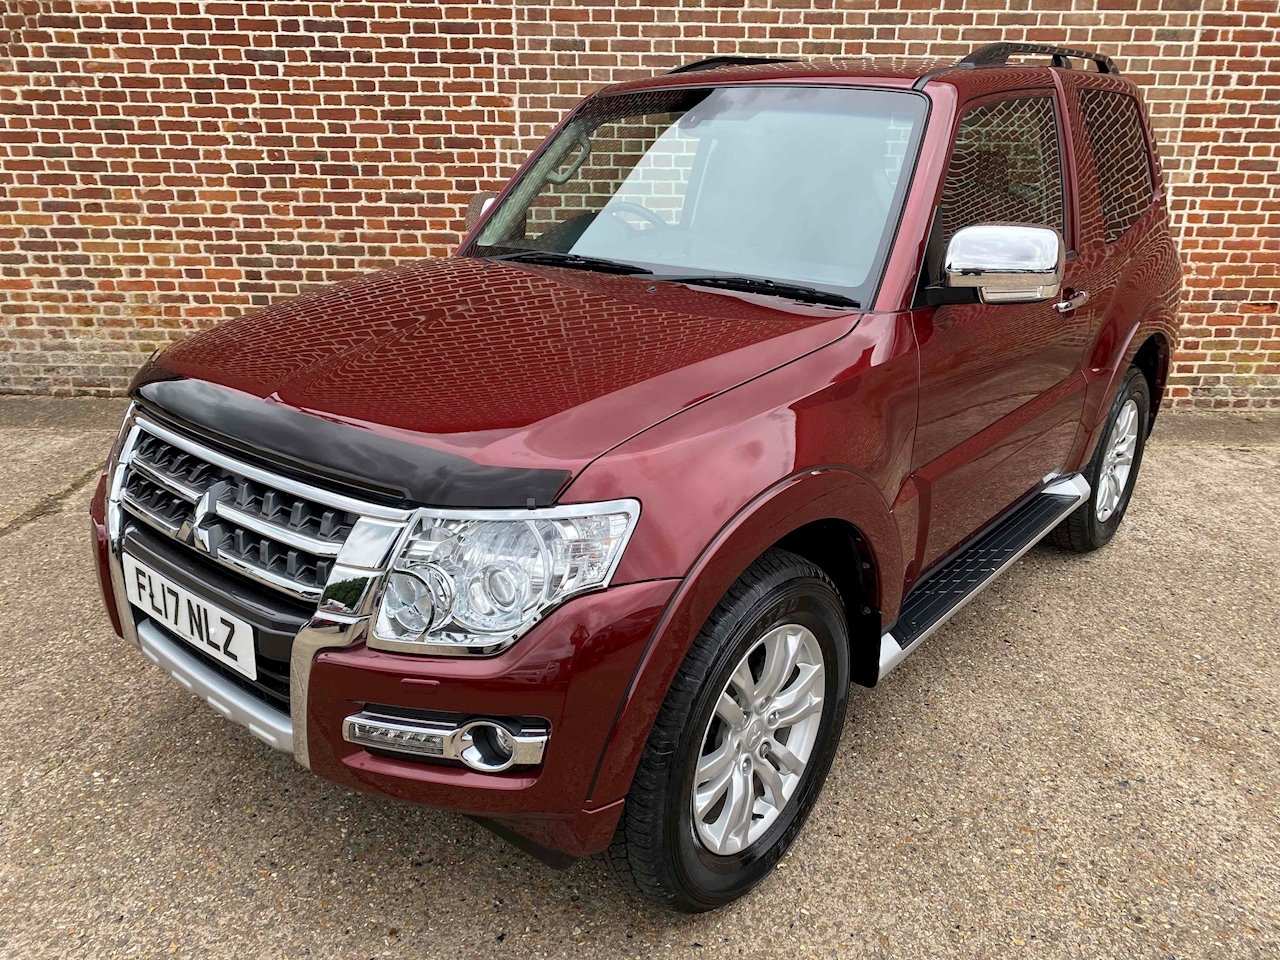 DI-DC Warrior SWB Commercial 3.2 3dr SUV Automatic Diesel